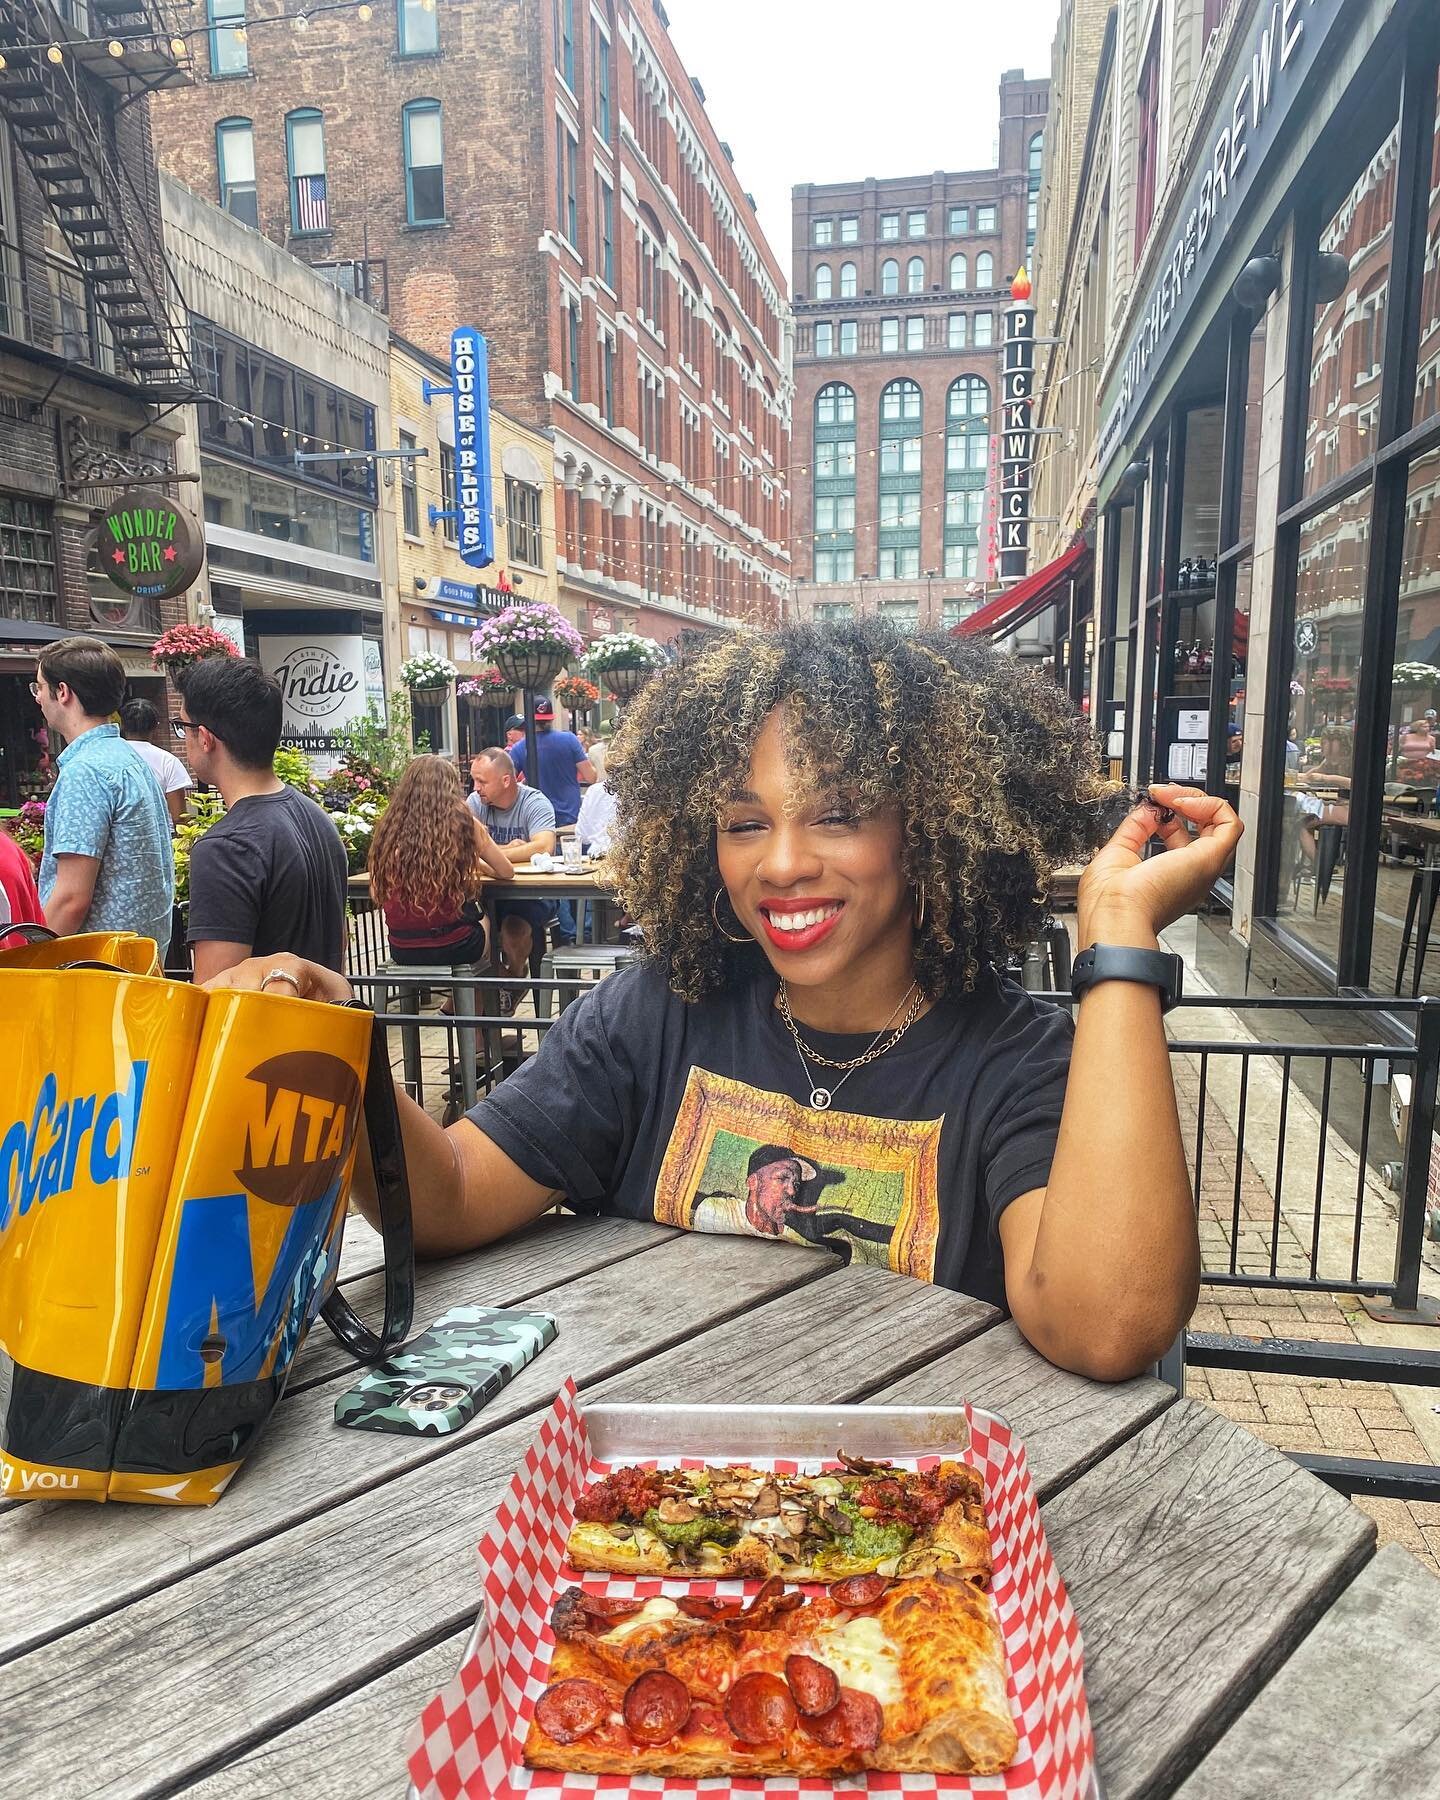 Quick stop to Cleveland for peace and pizza grease with my sibling-physician-friend @paging_drcass19 on her one day off 🥰🍕✨

Apparently, it&rsquo;s &ldquo;Christmas in July&rdquo; out here and the timing couldn&rsquo;t be better, a meaningful 24hou